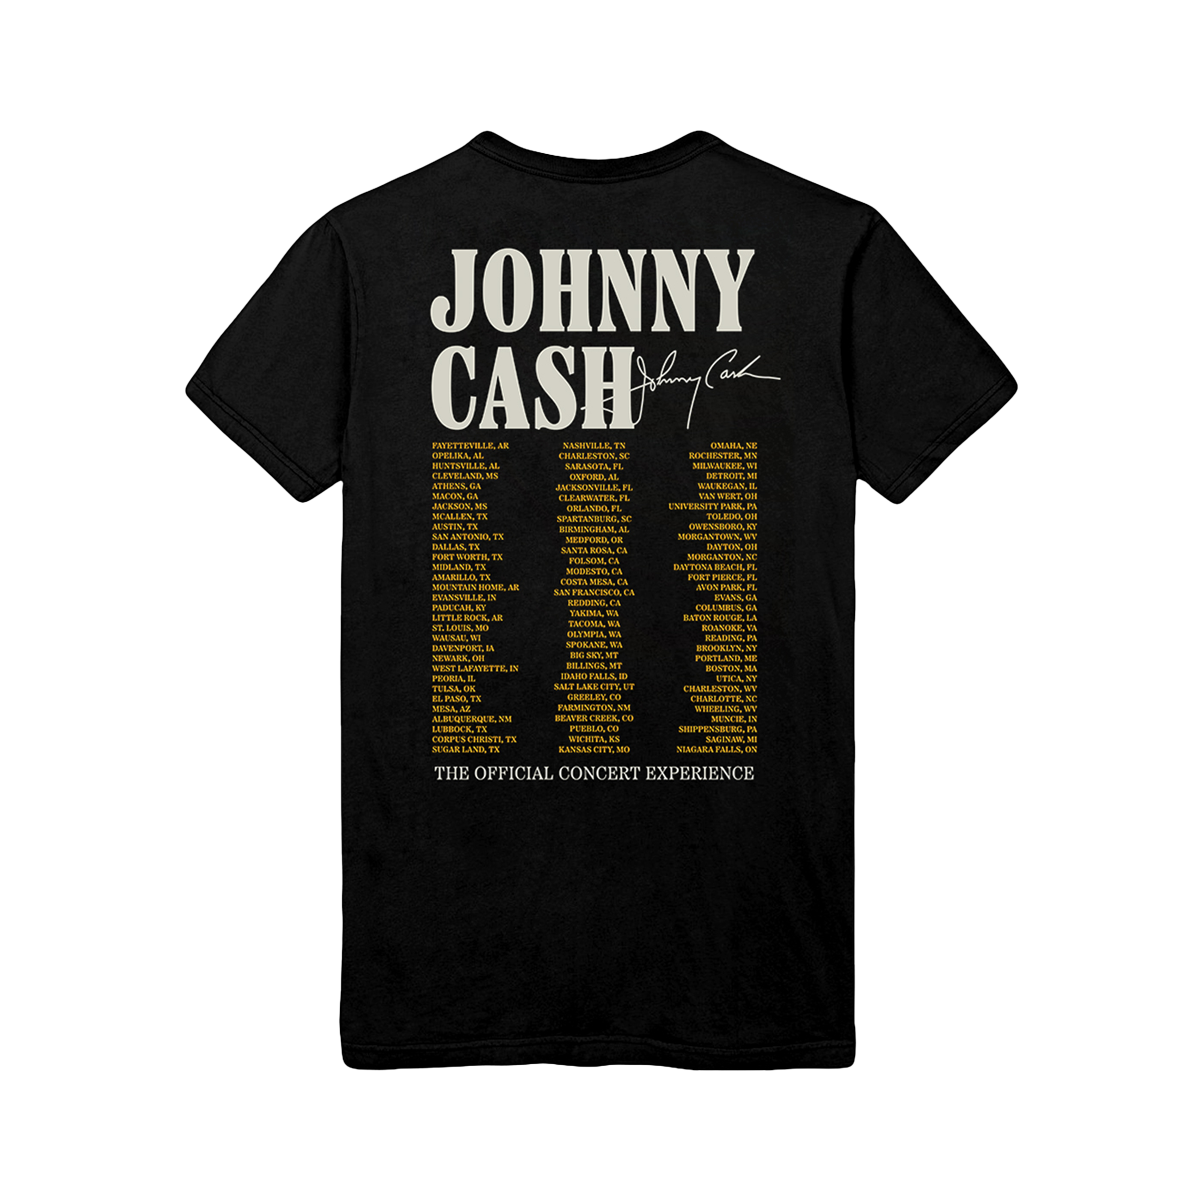 Johnny Cash: The Official Concert Experience T-Shirt